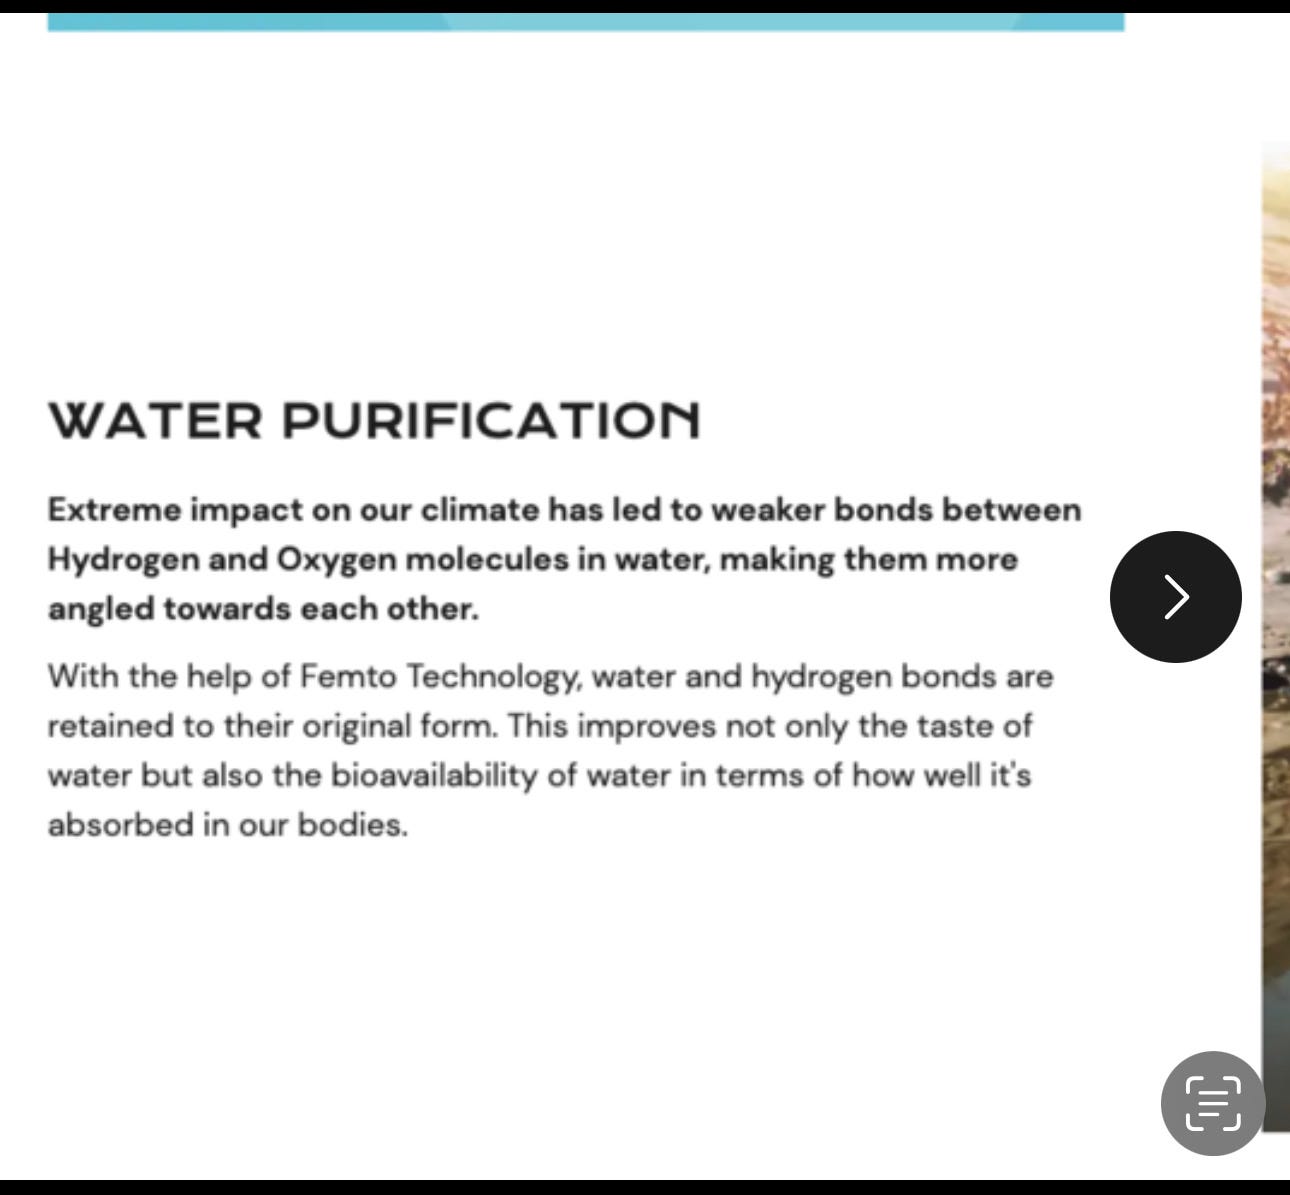 WATER PURIFICATION Extreme impact on our climate has led to weaker bonds between Hydrogen and Oxygen molecules in water, making them more angled towards each other. With the help of Femto Technology, water and hydrogen bonds are retained to their original form. This improves not only the taste of water but also the bioavailability of water in terms of how well it's absorbed in our bodies.